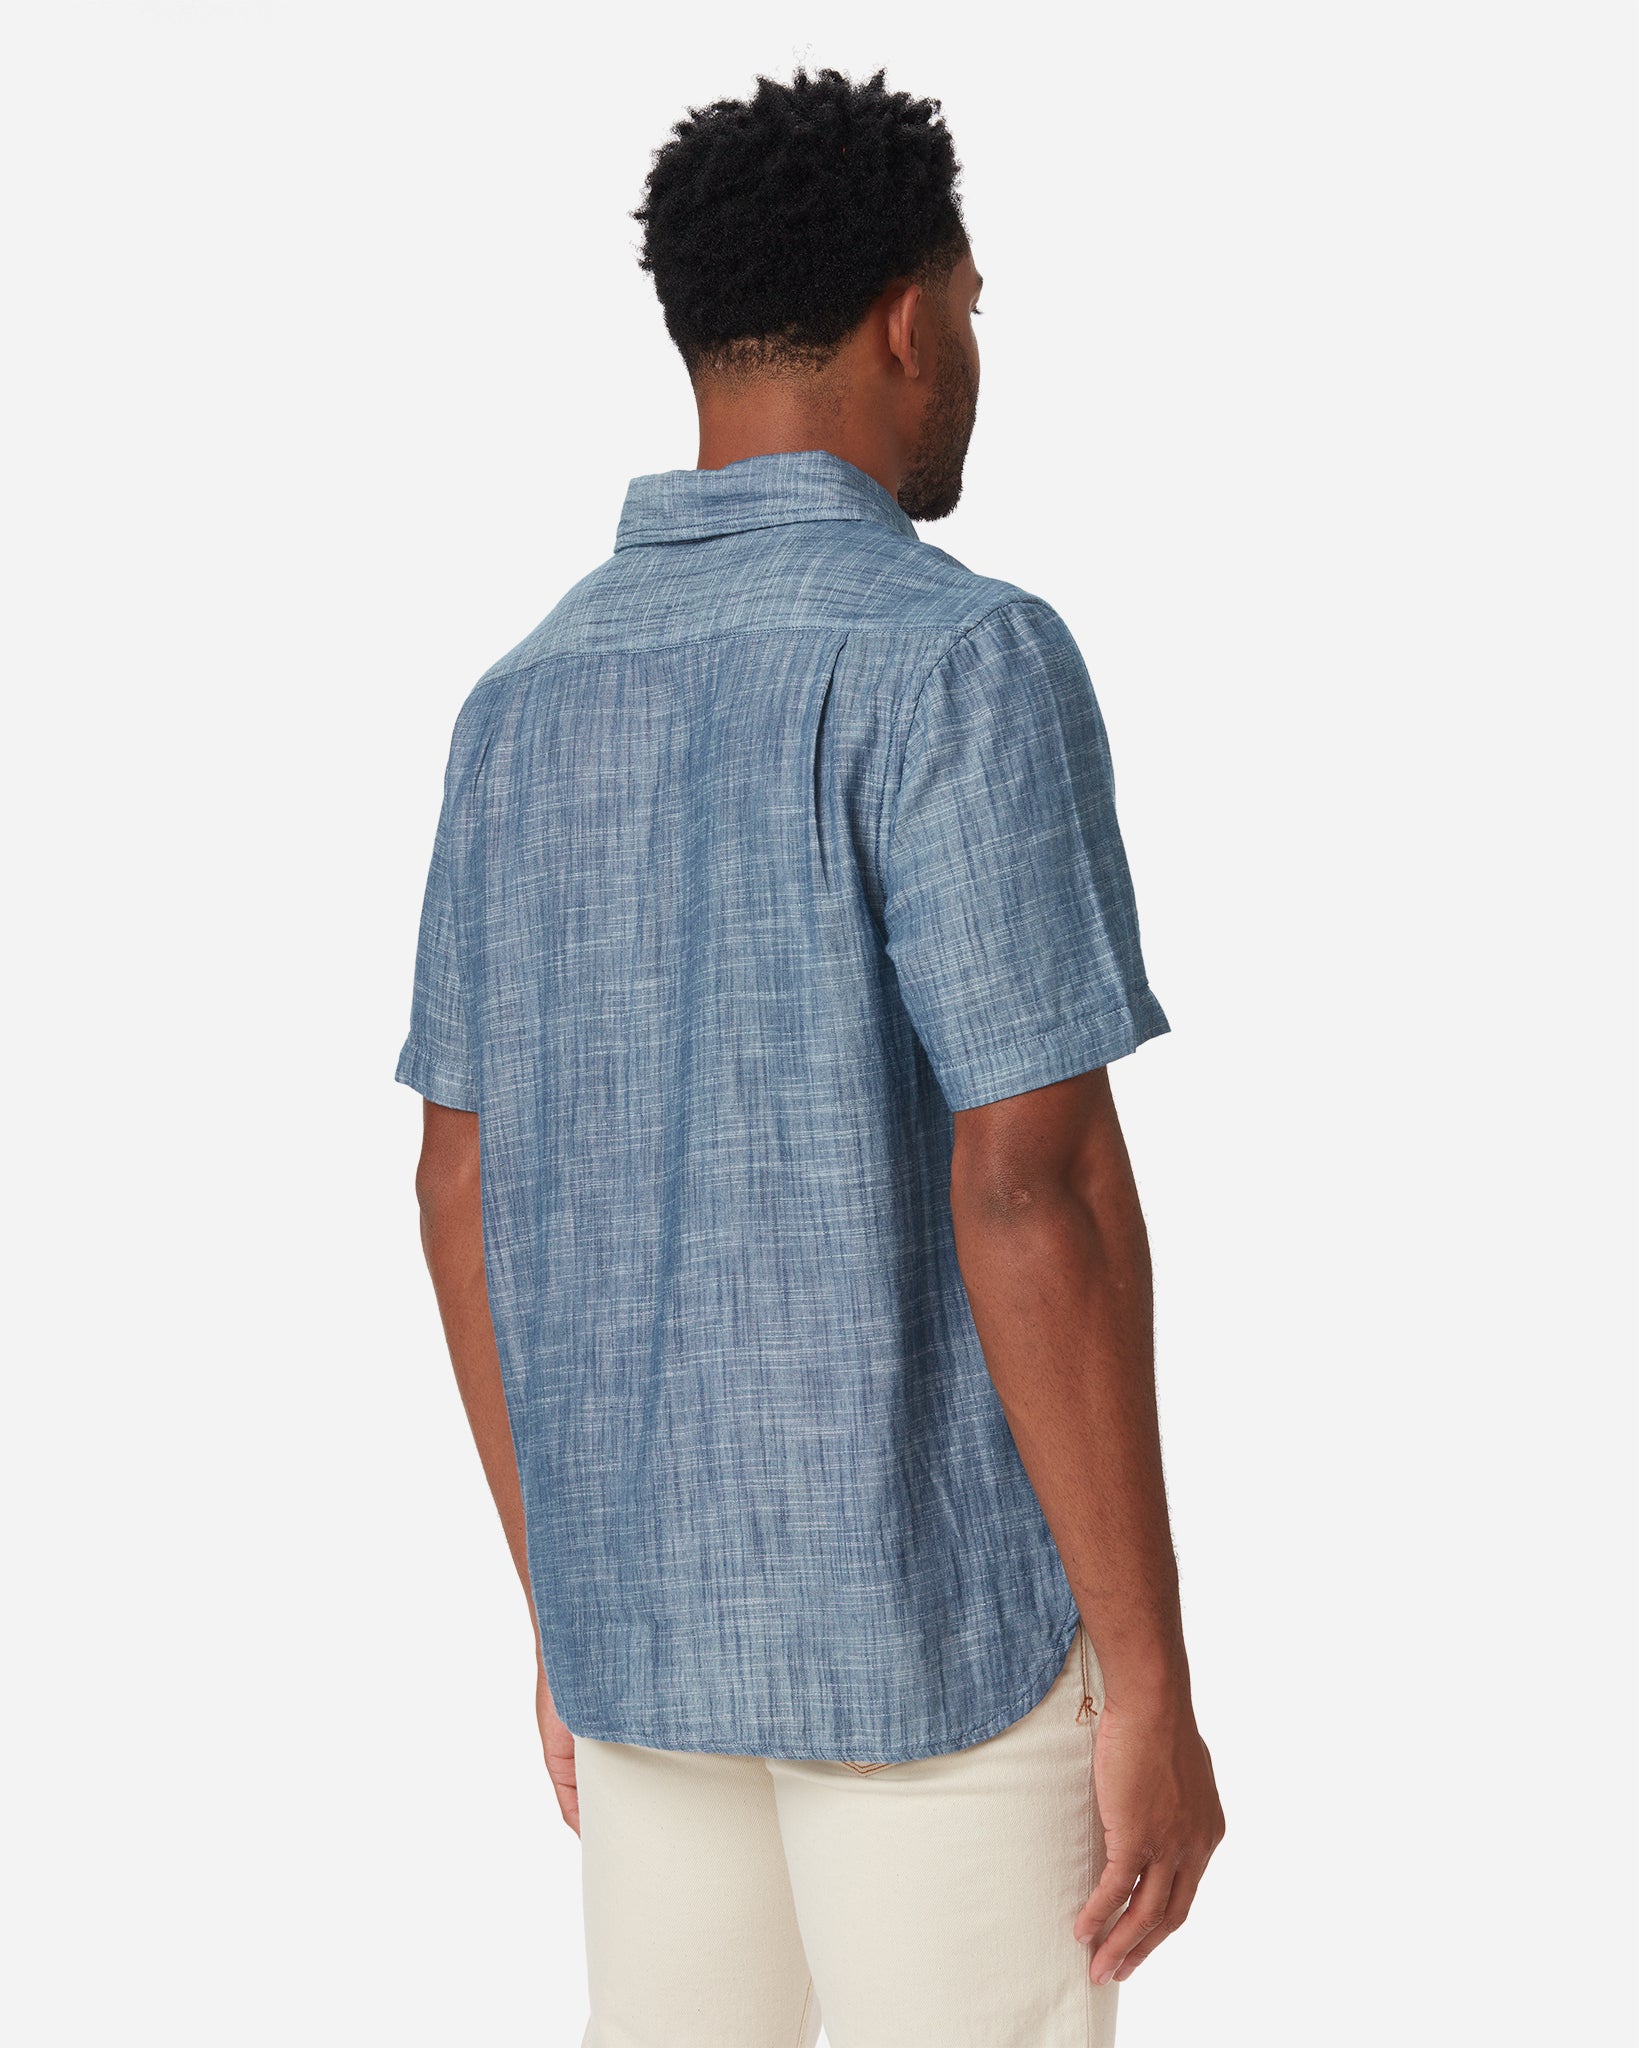 back of model facing away with a slight rightward gaze wearing Ace Rivington short-sleeved indigo slub soft textured-cotton shirt with linen hand feel, pearl buttons, left-breast pocket, collar, and off white interior and a pair of Ace Rivington ecru color denim jeans